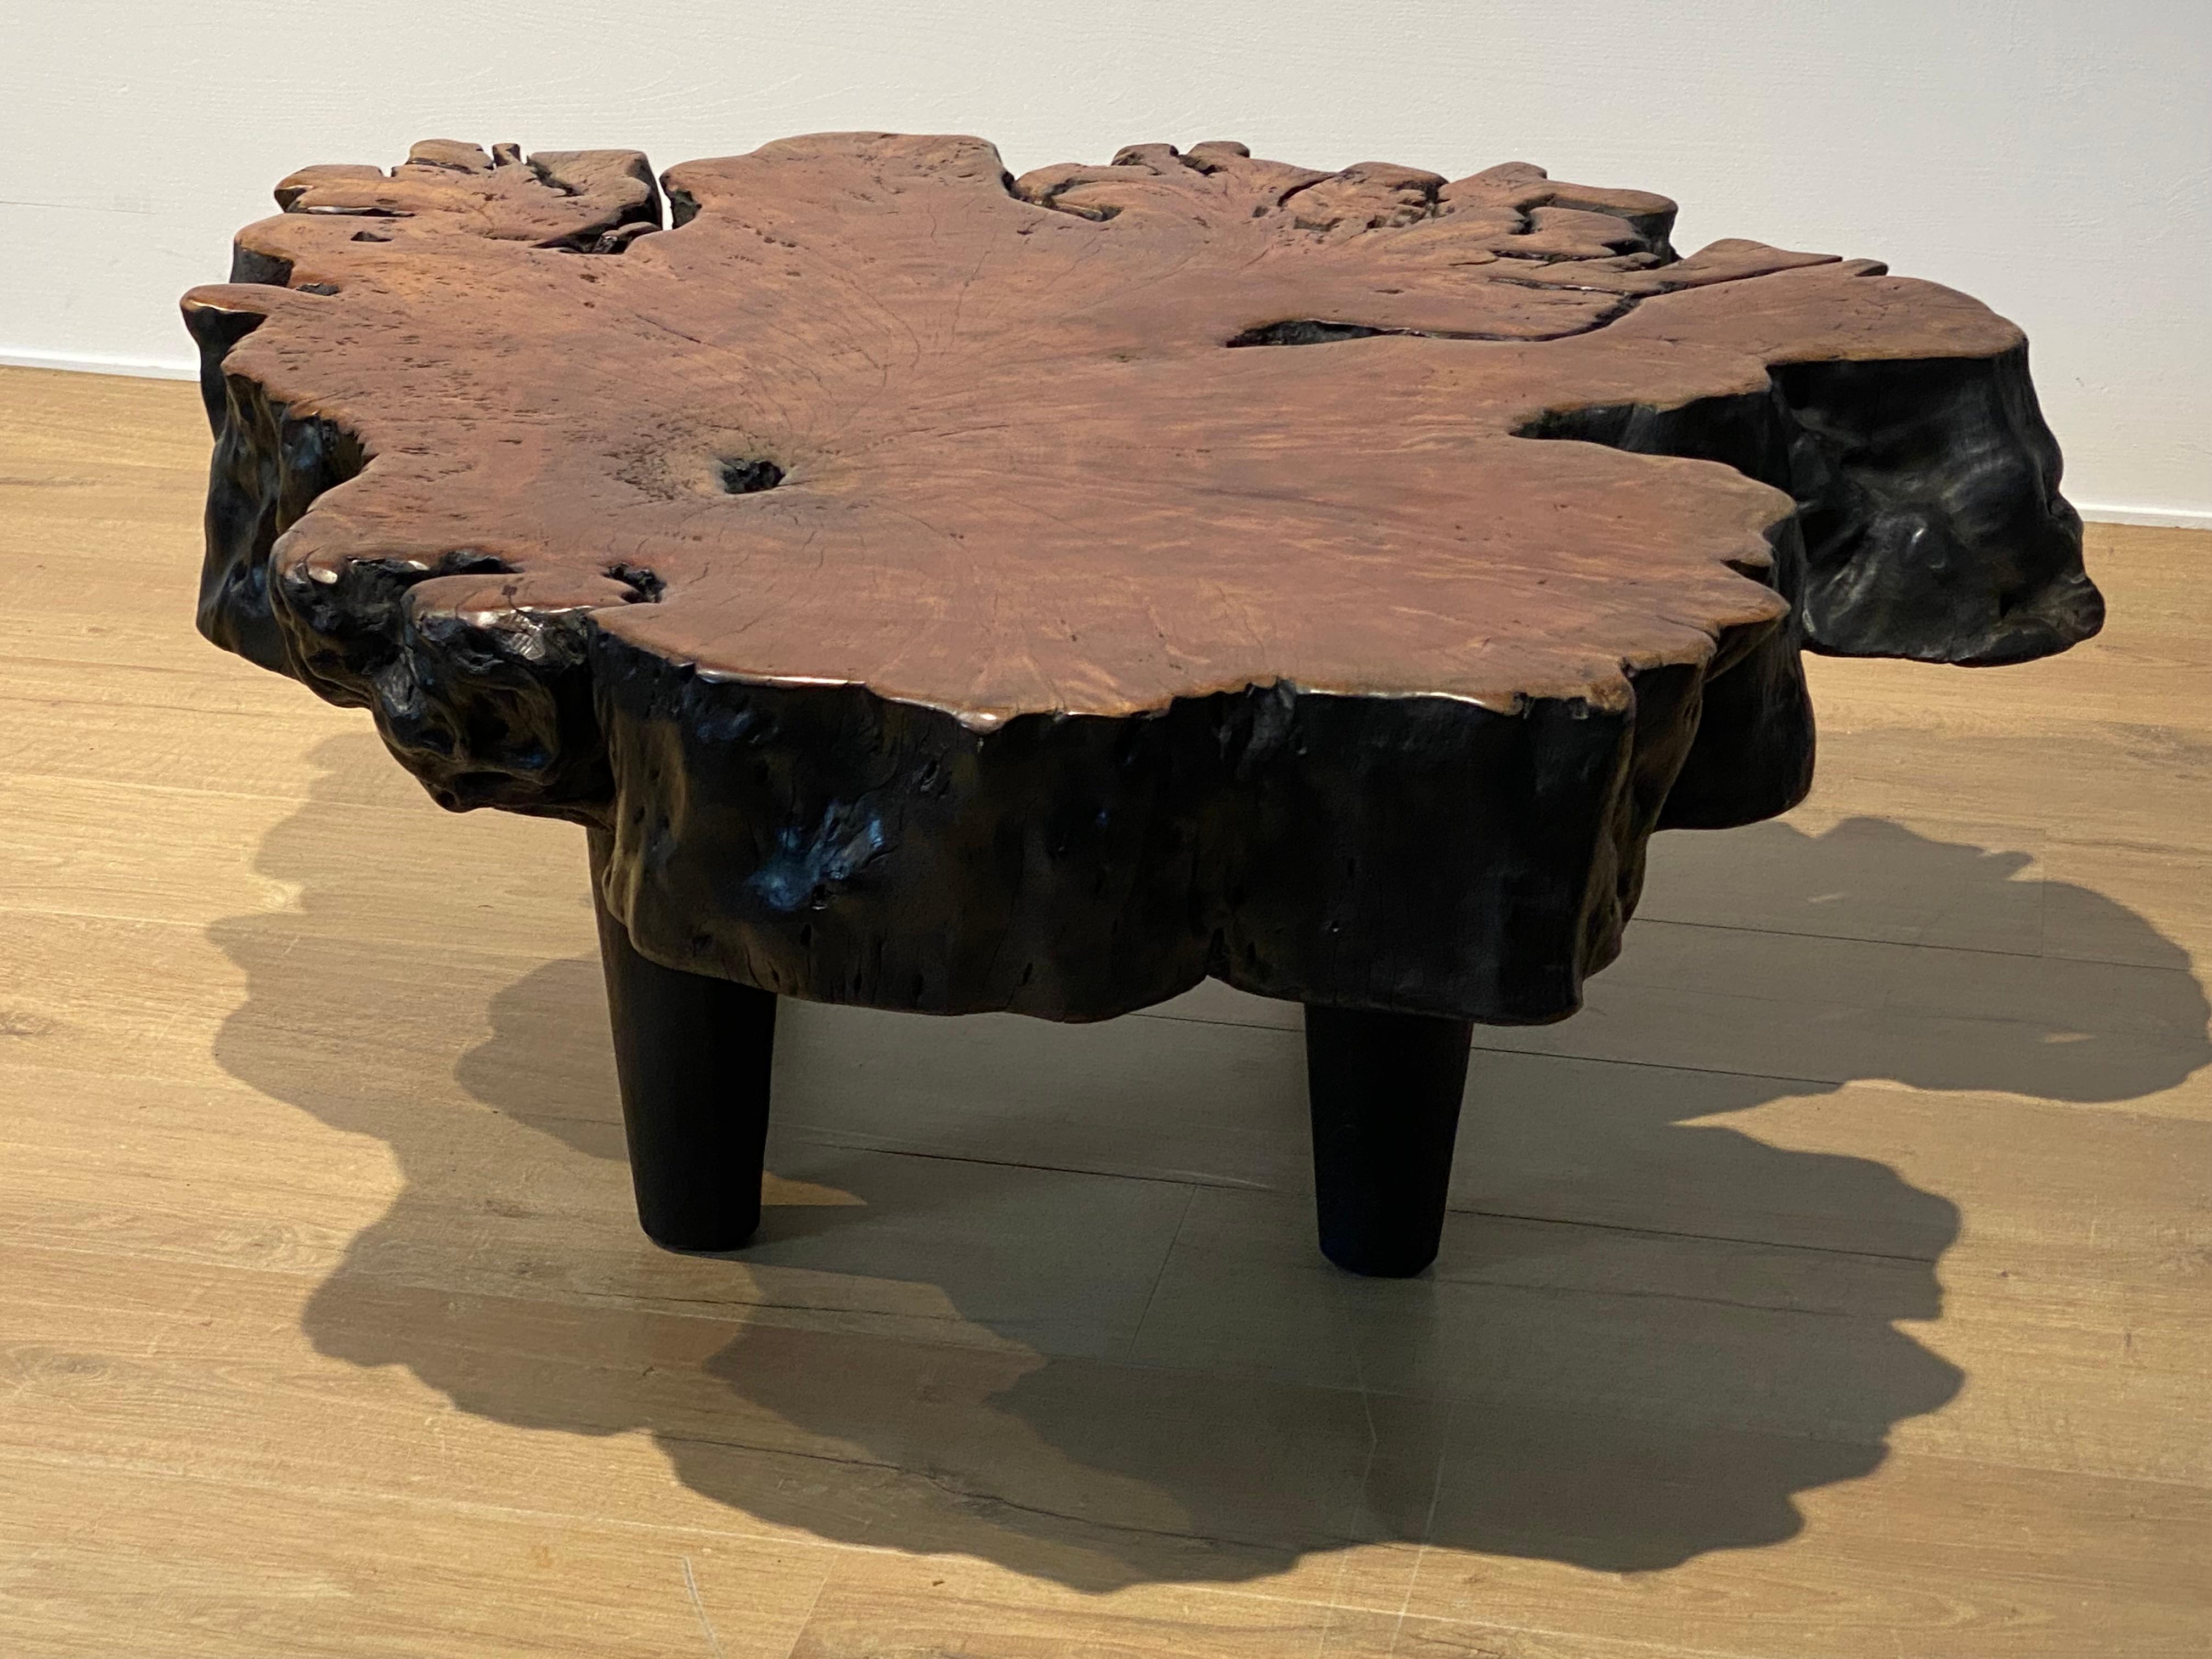 Exceptional Sofa Table in Lychee Wood,
the table stands on 4 small and elegant feet,
the brutalist table has its original and natural form of the Tree,
beautiful patina and shine of the Lychee Wood,
powerful piece of furniture